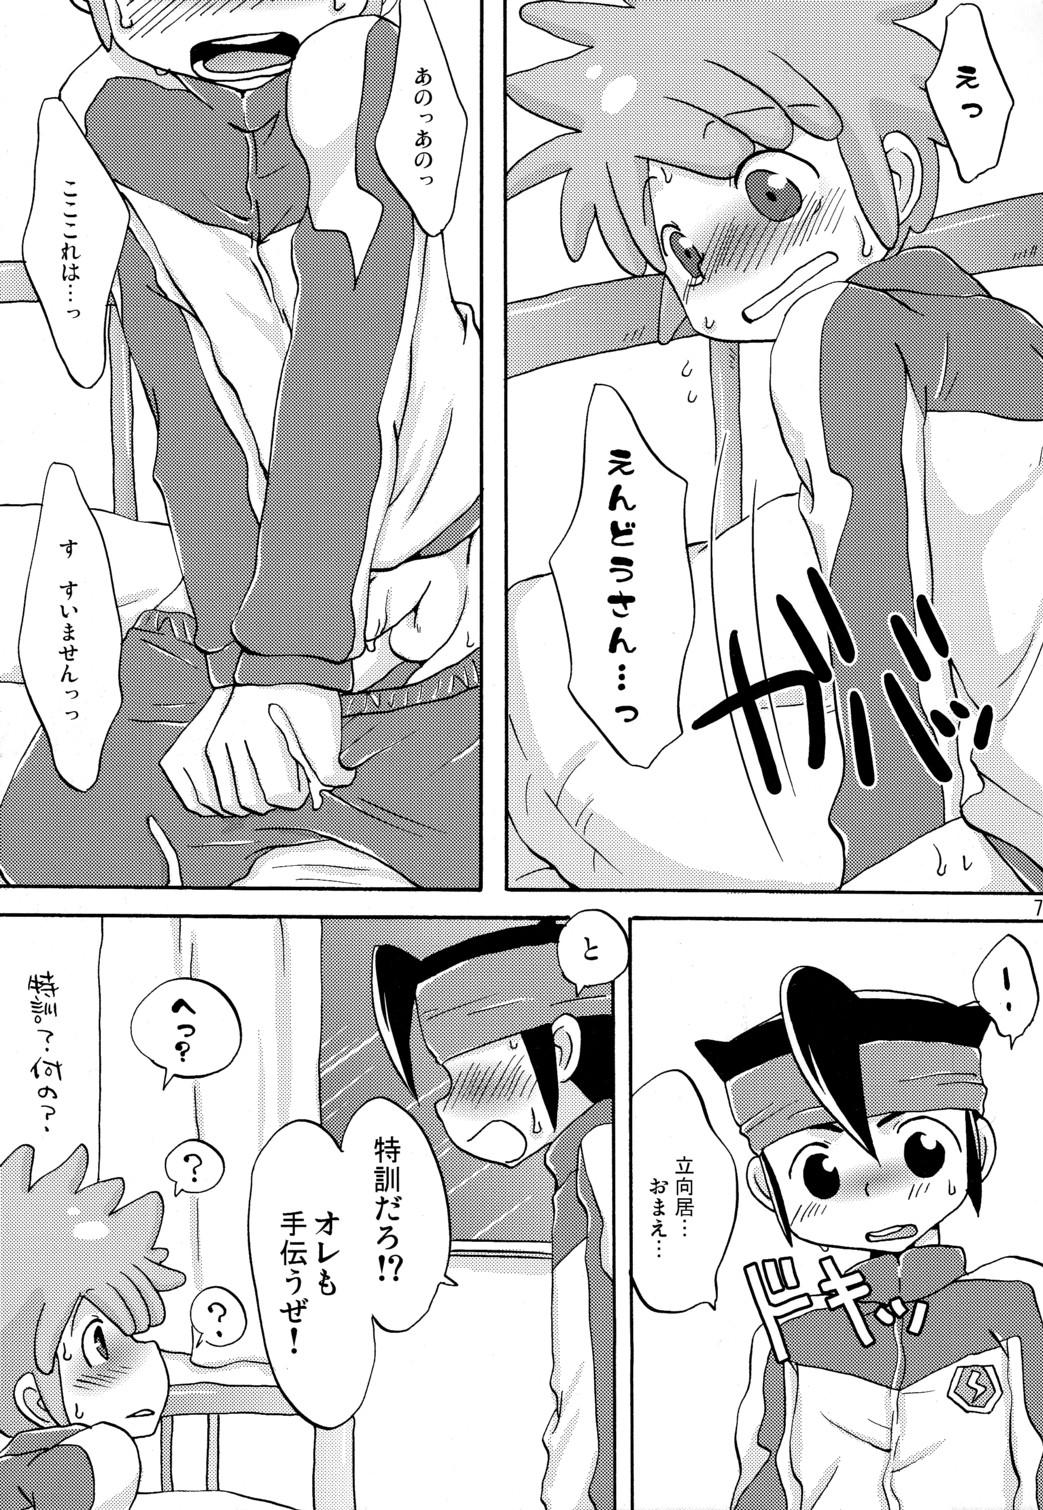 Pawg SWEET ROOM - Inazuma eleven Sweet - Page 11